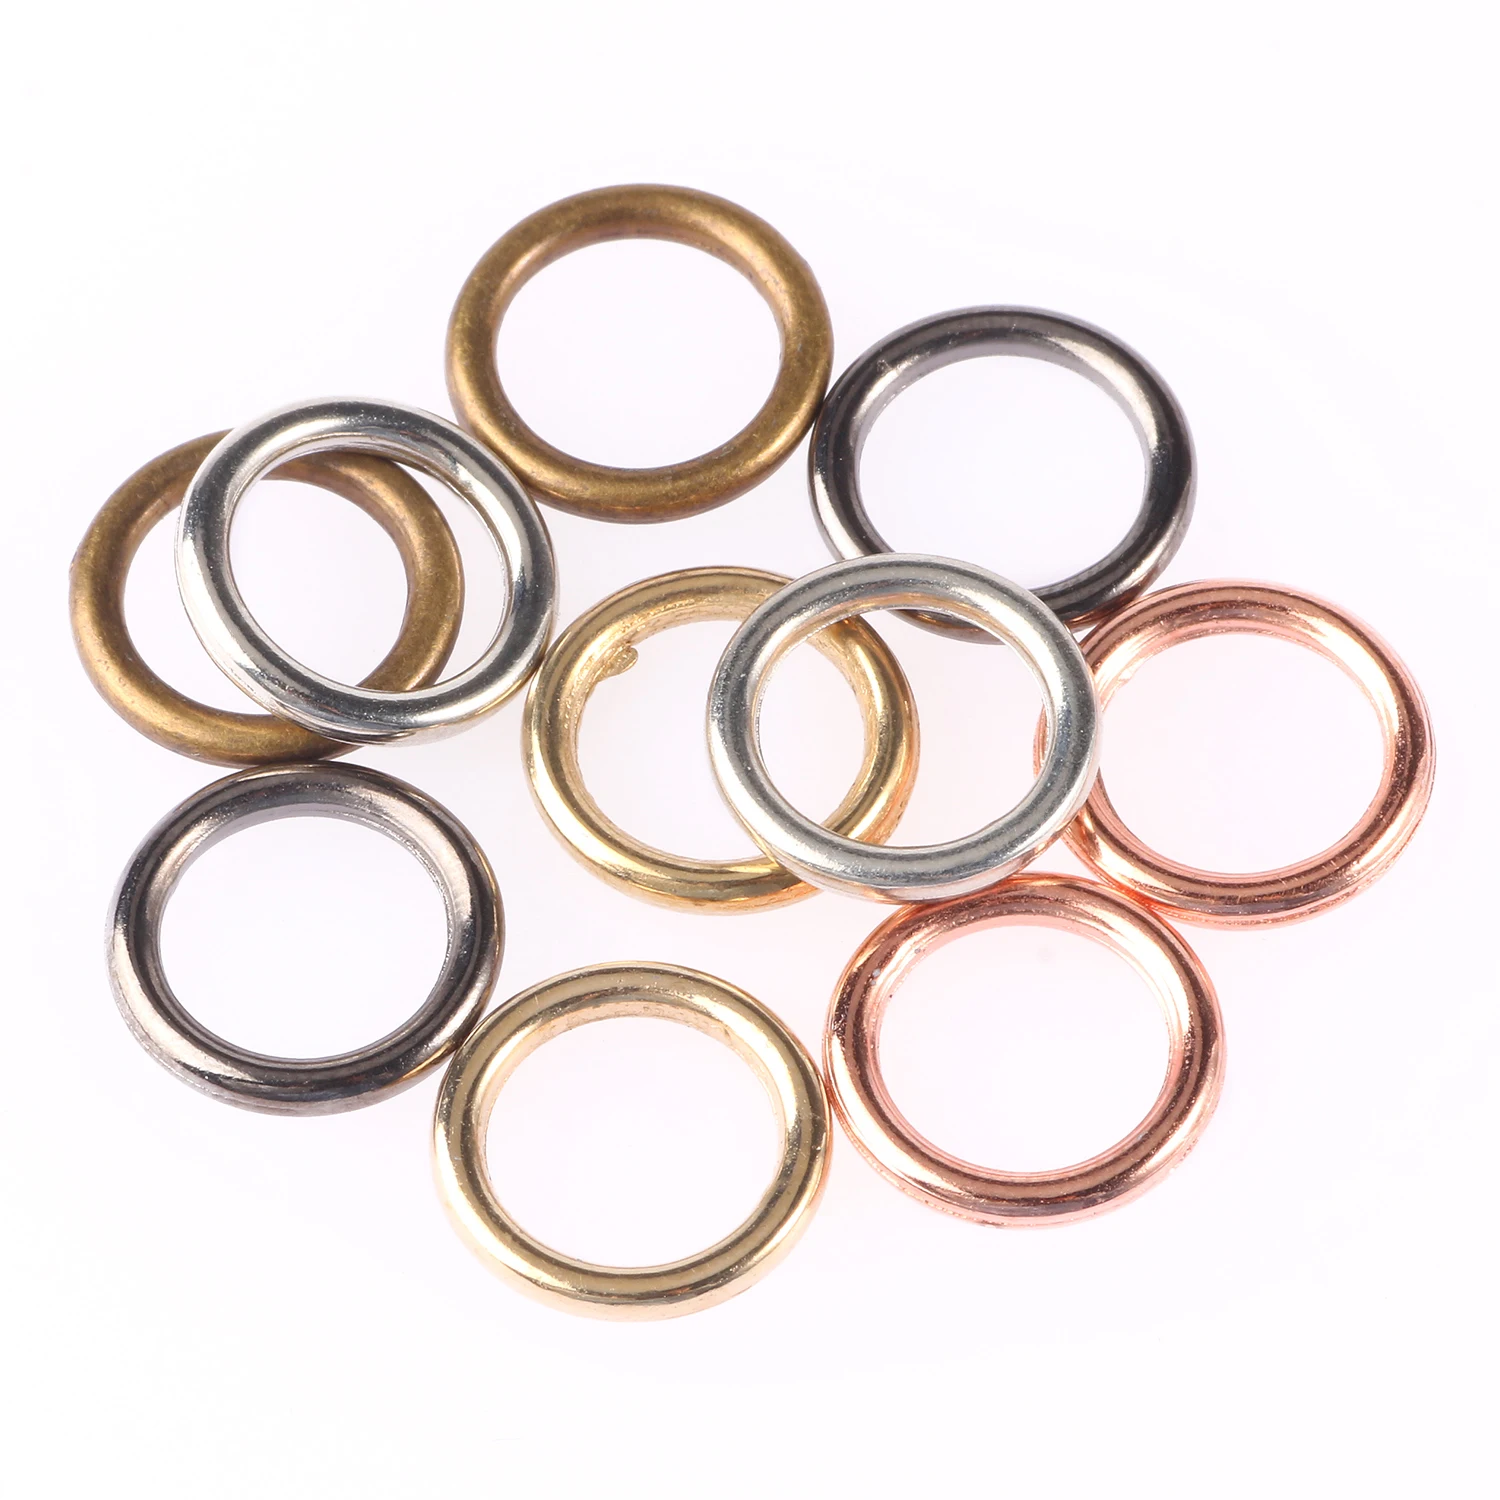 Multicolor Closed Rings Circle Earring Hoops Round Spacers Loops Connectors For Jewelry Making Accessories Supplies